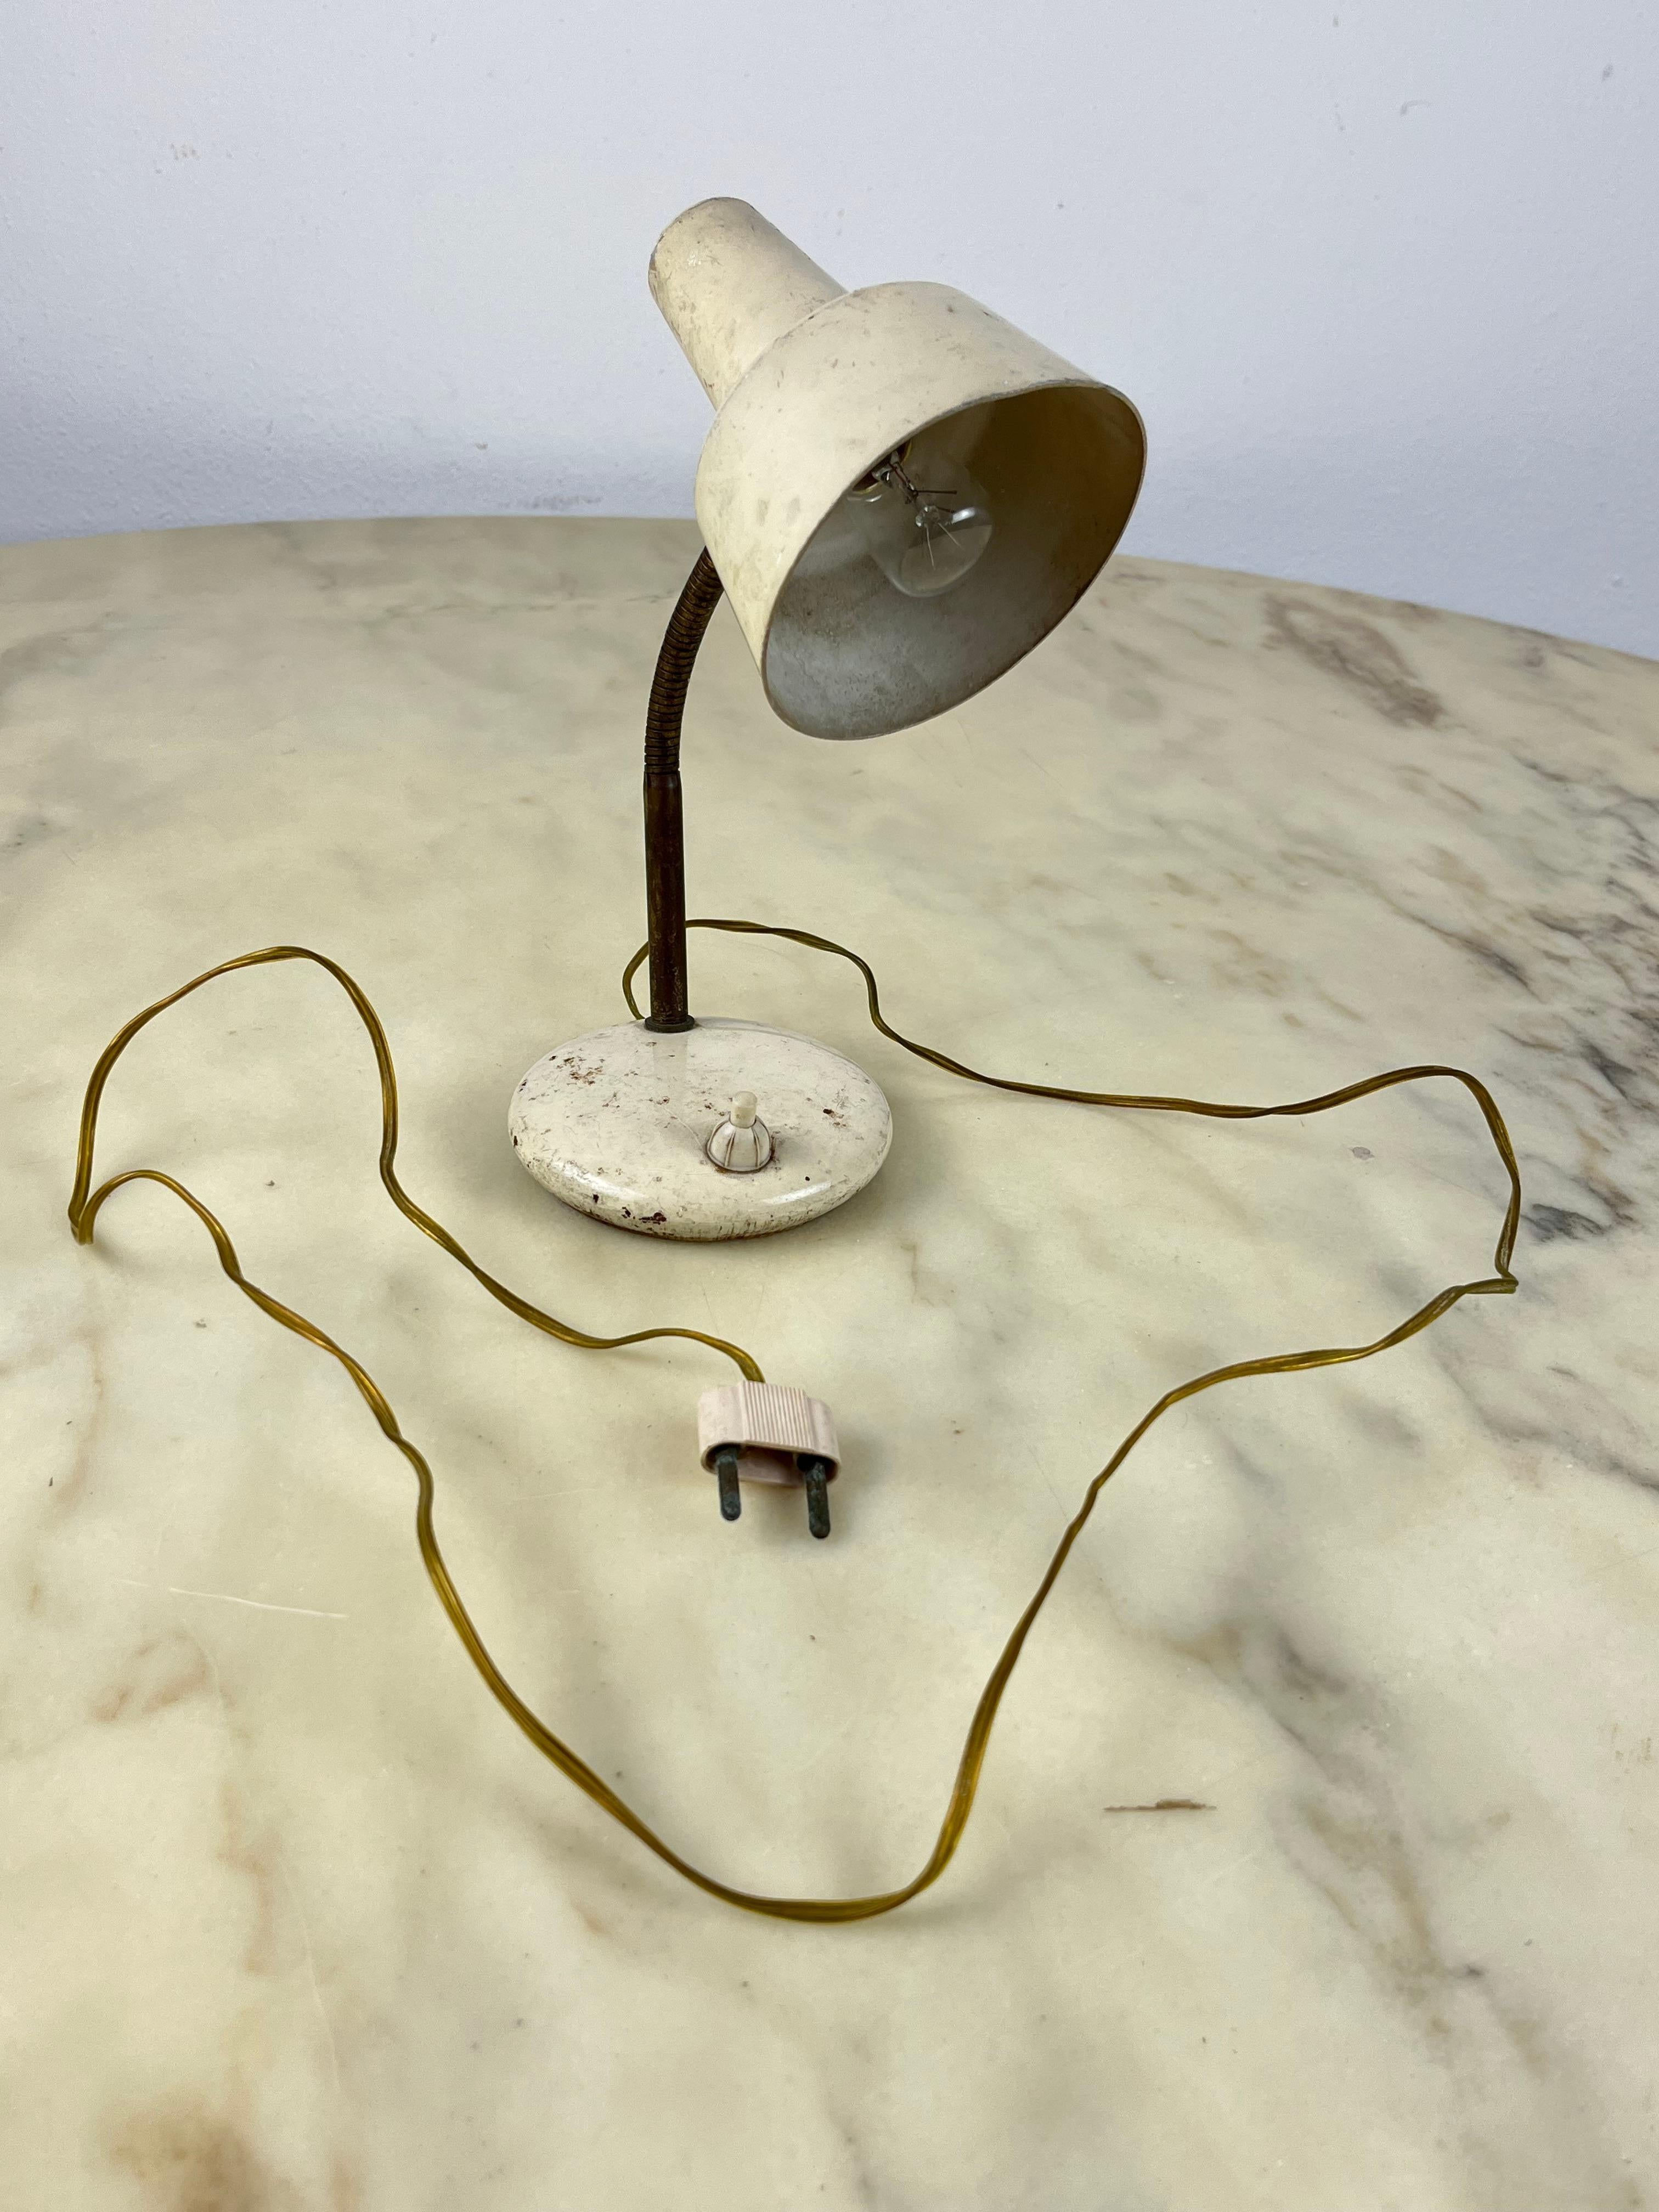 Table lamp in lacquered metal and brass, Italy, 1950s
Original period electrical wire and plug. We can provide adapter for operation abroad.
Intact and functional, good condition, small signs of aging.